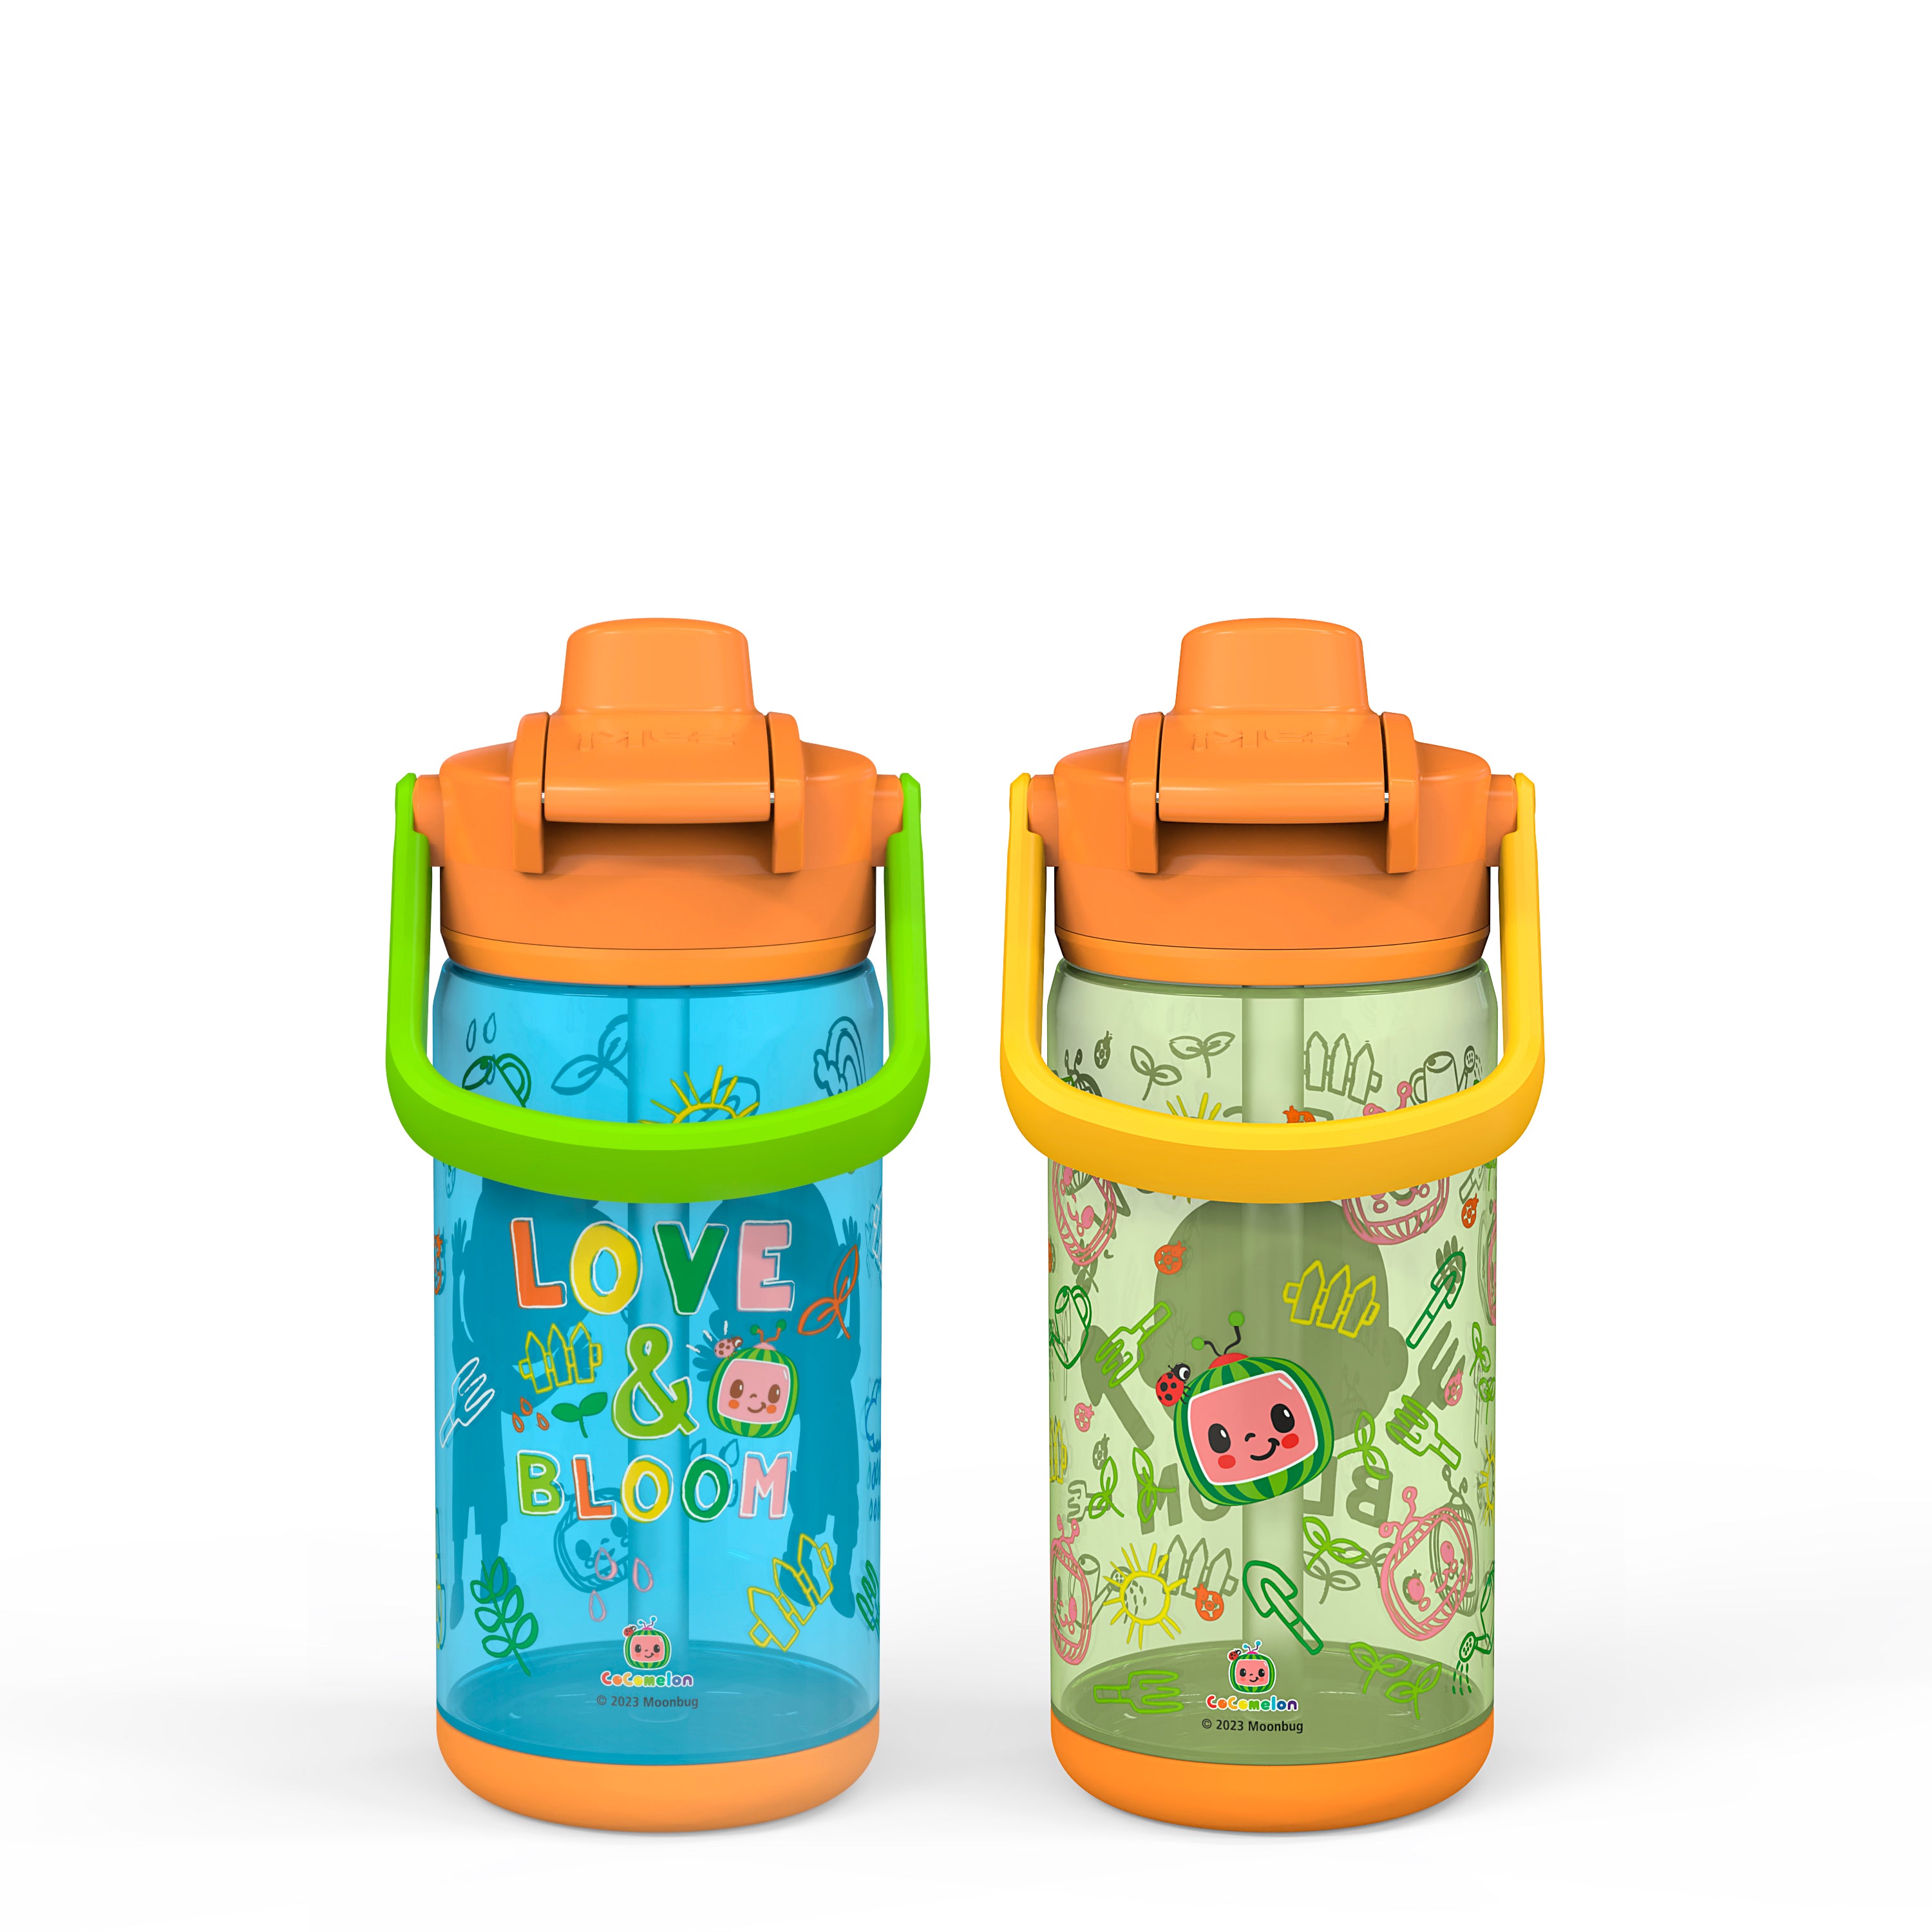 CoComelon Beacon 2-Piece Kids Water Bottle Set with Covered Spout, 16 Ounces